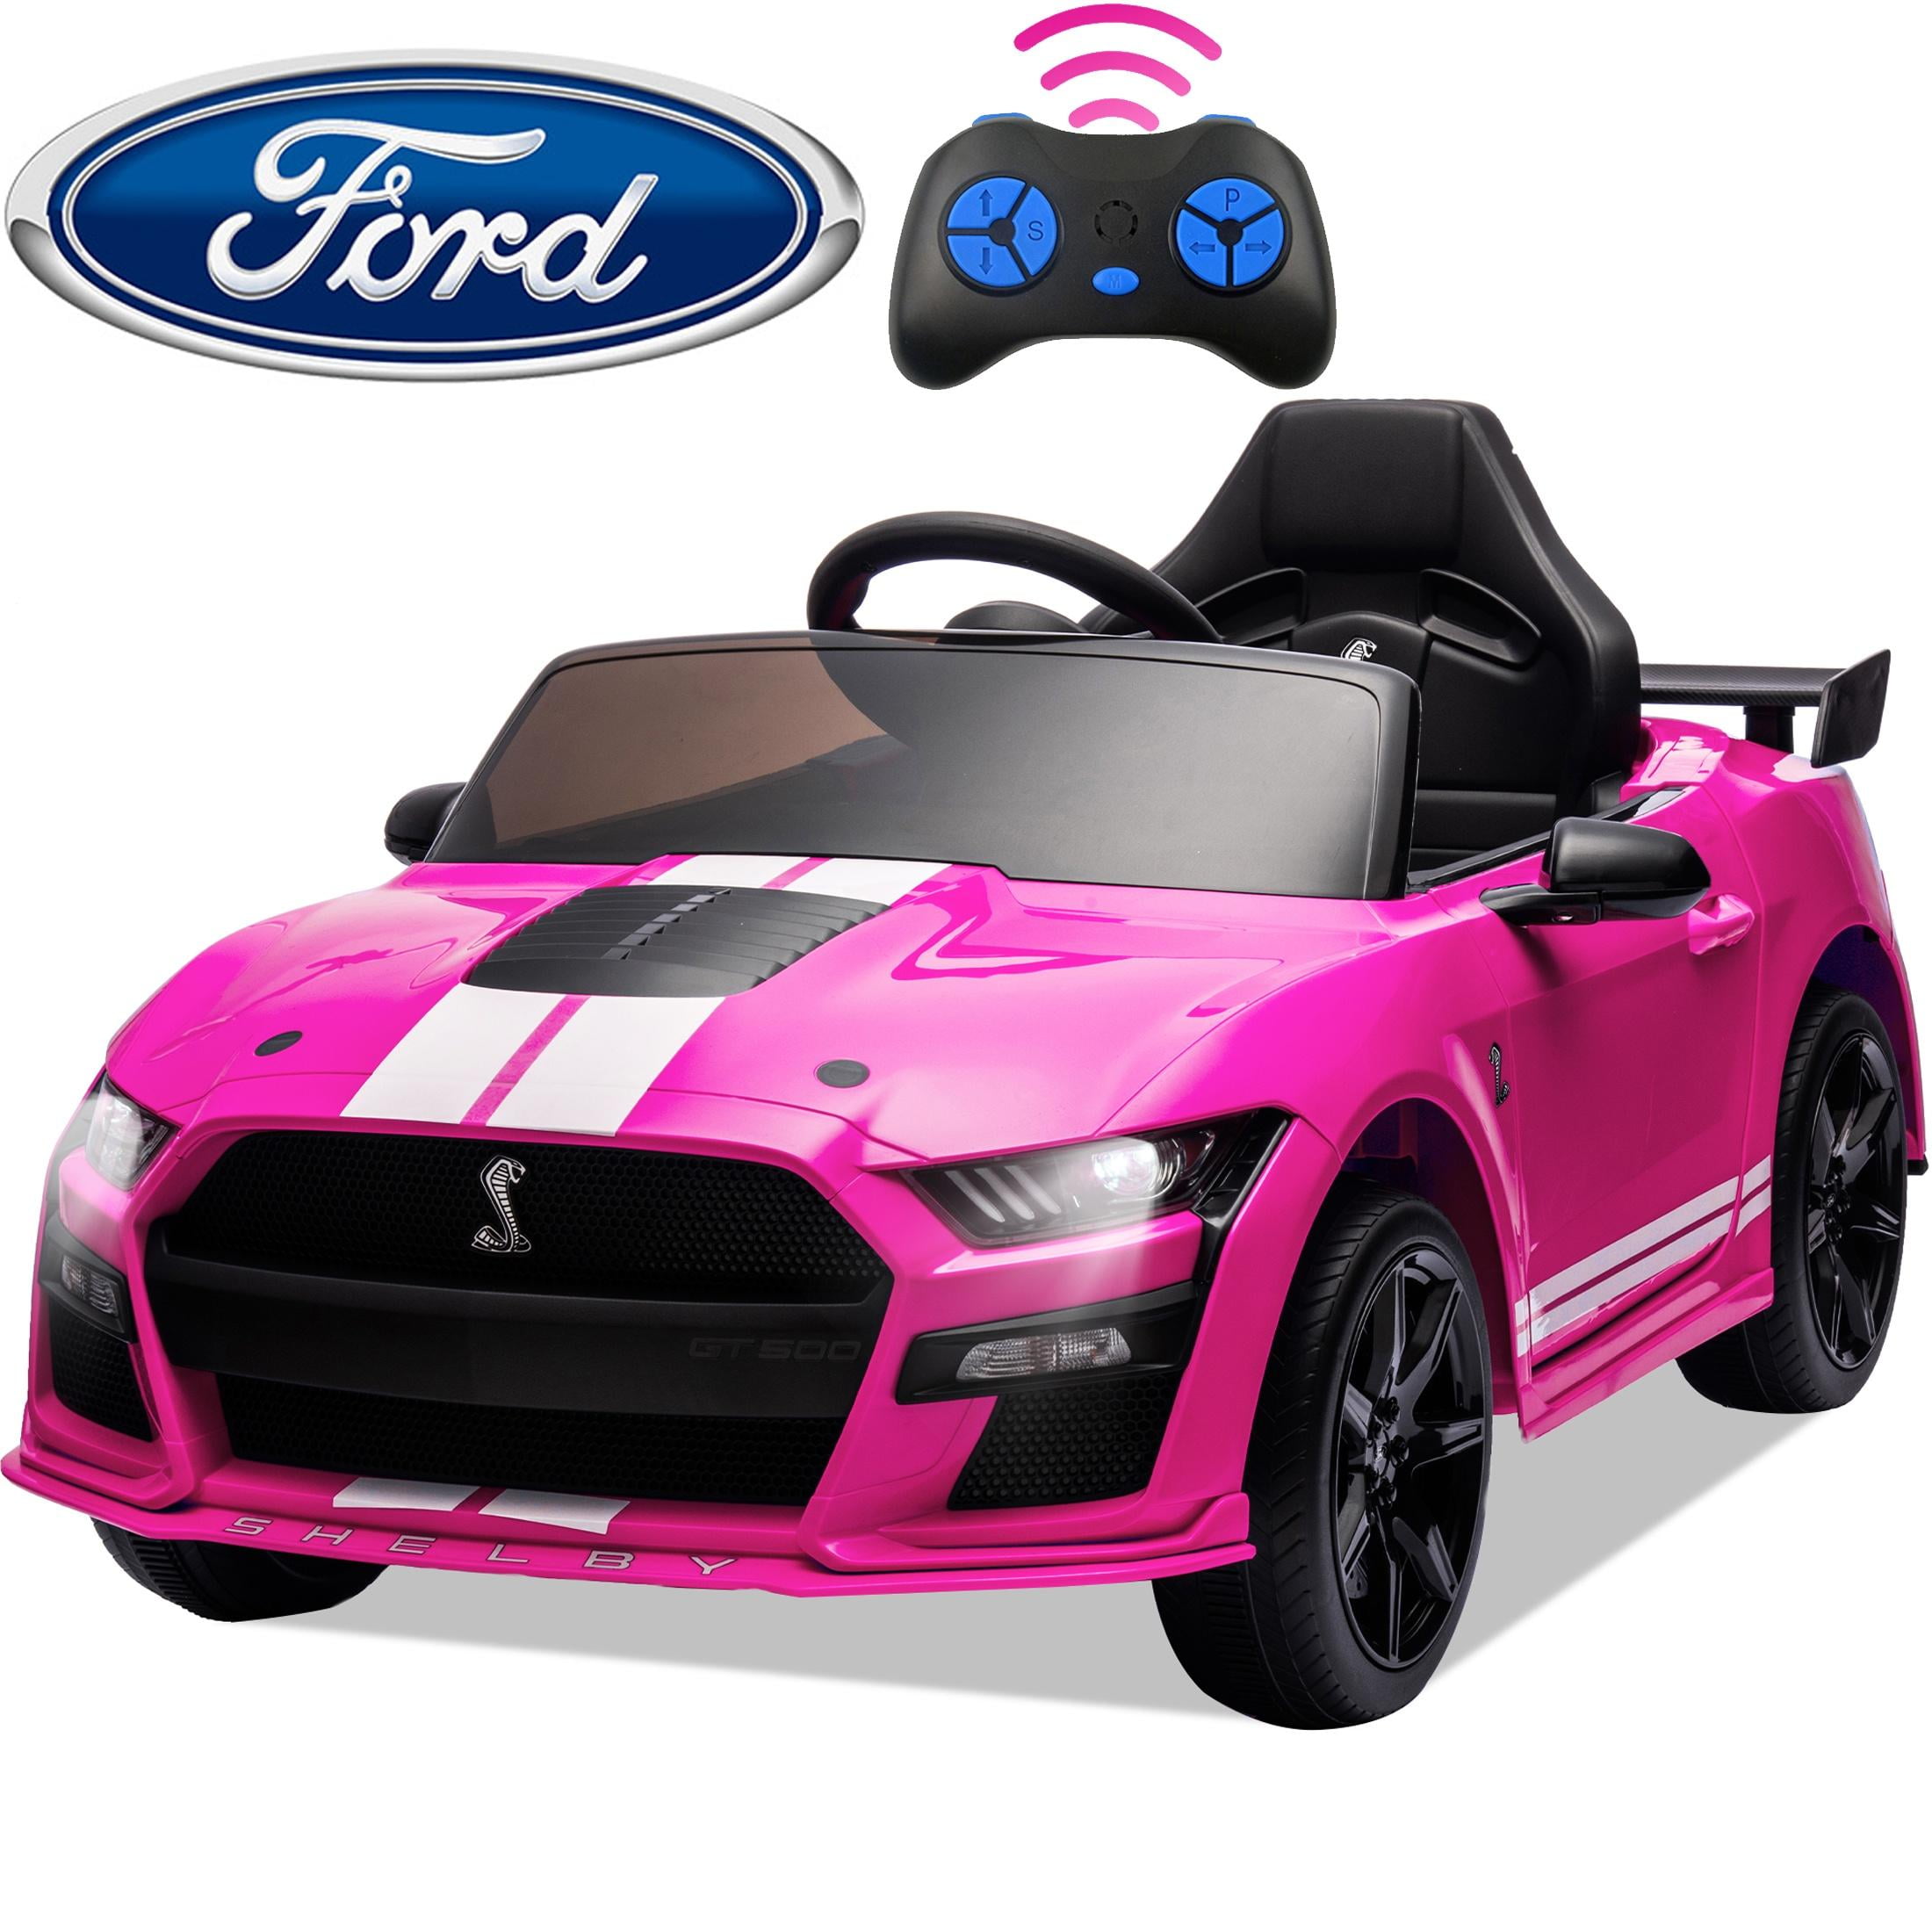 Ride on Toy Cars for Kids, 12V Ford Mustang Shelby Powered Ride on Truck Car with Remote Control, Electric Vehicle Car for kids Girl Boy 3-6 w/Music, Bluetooth, LED Lights, 3 Speeds, 4 Wheelers, Pink